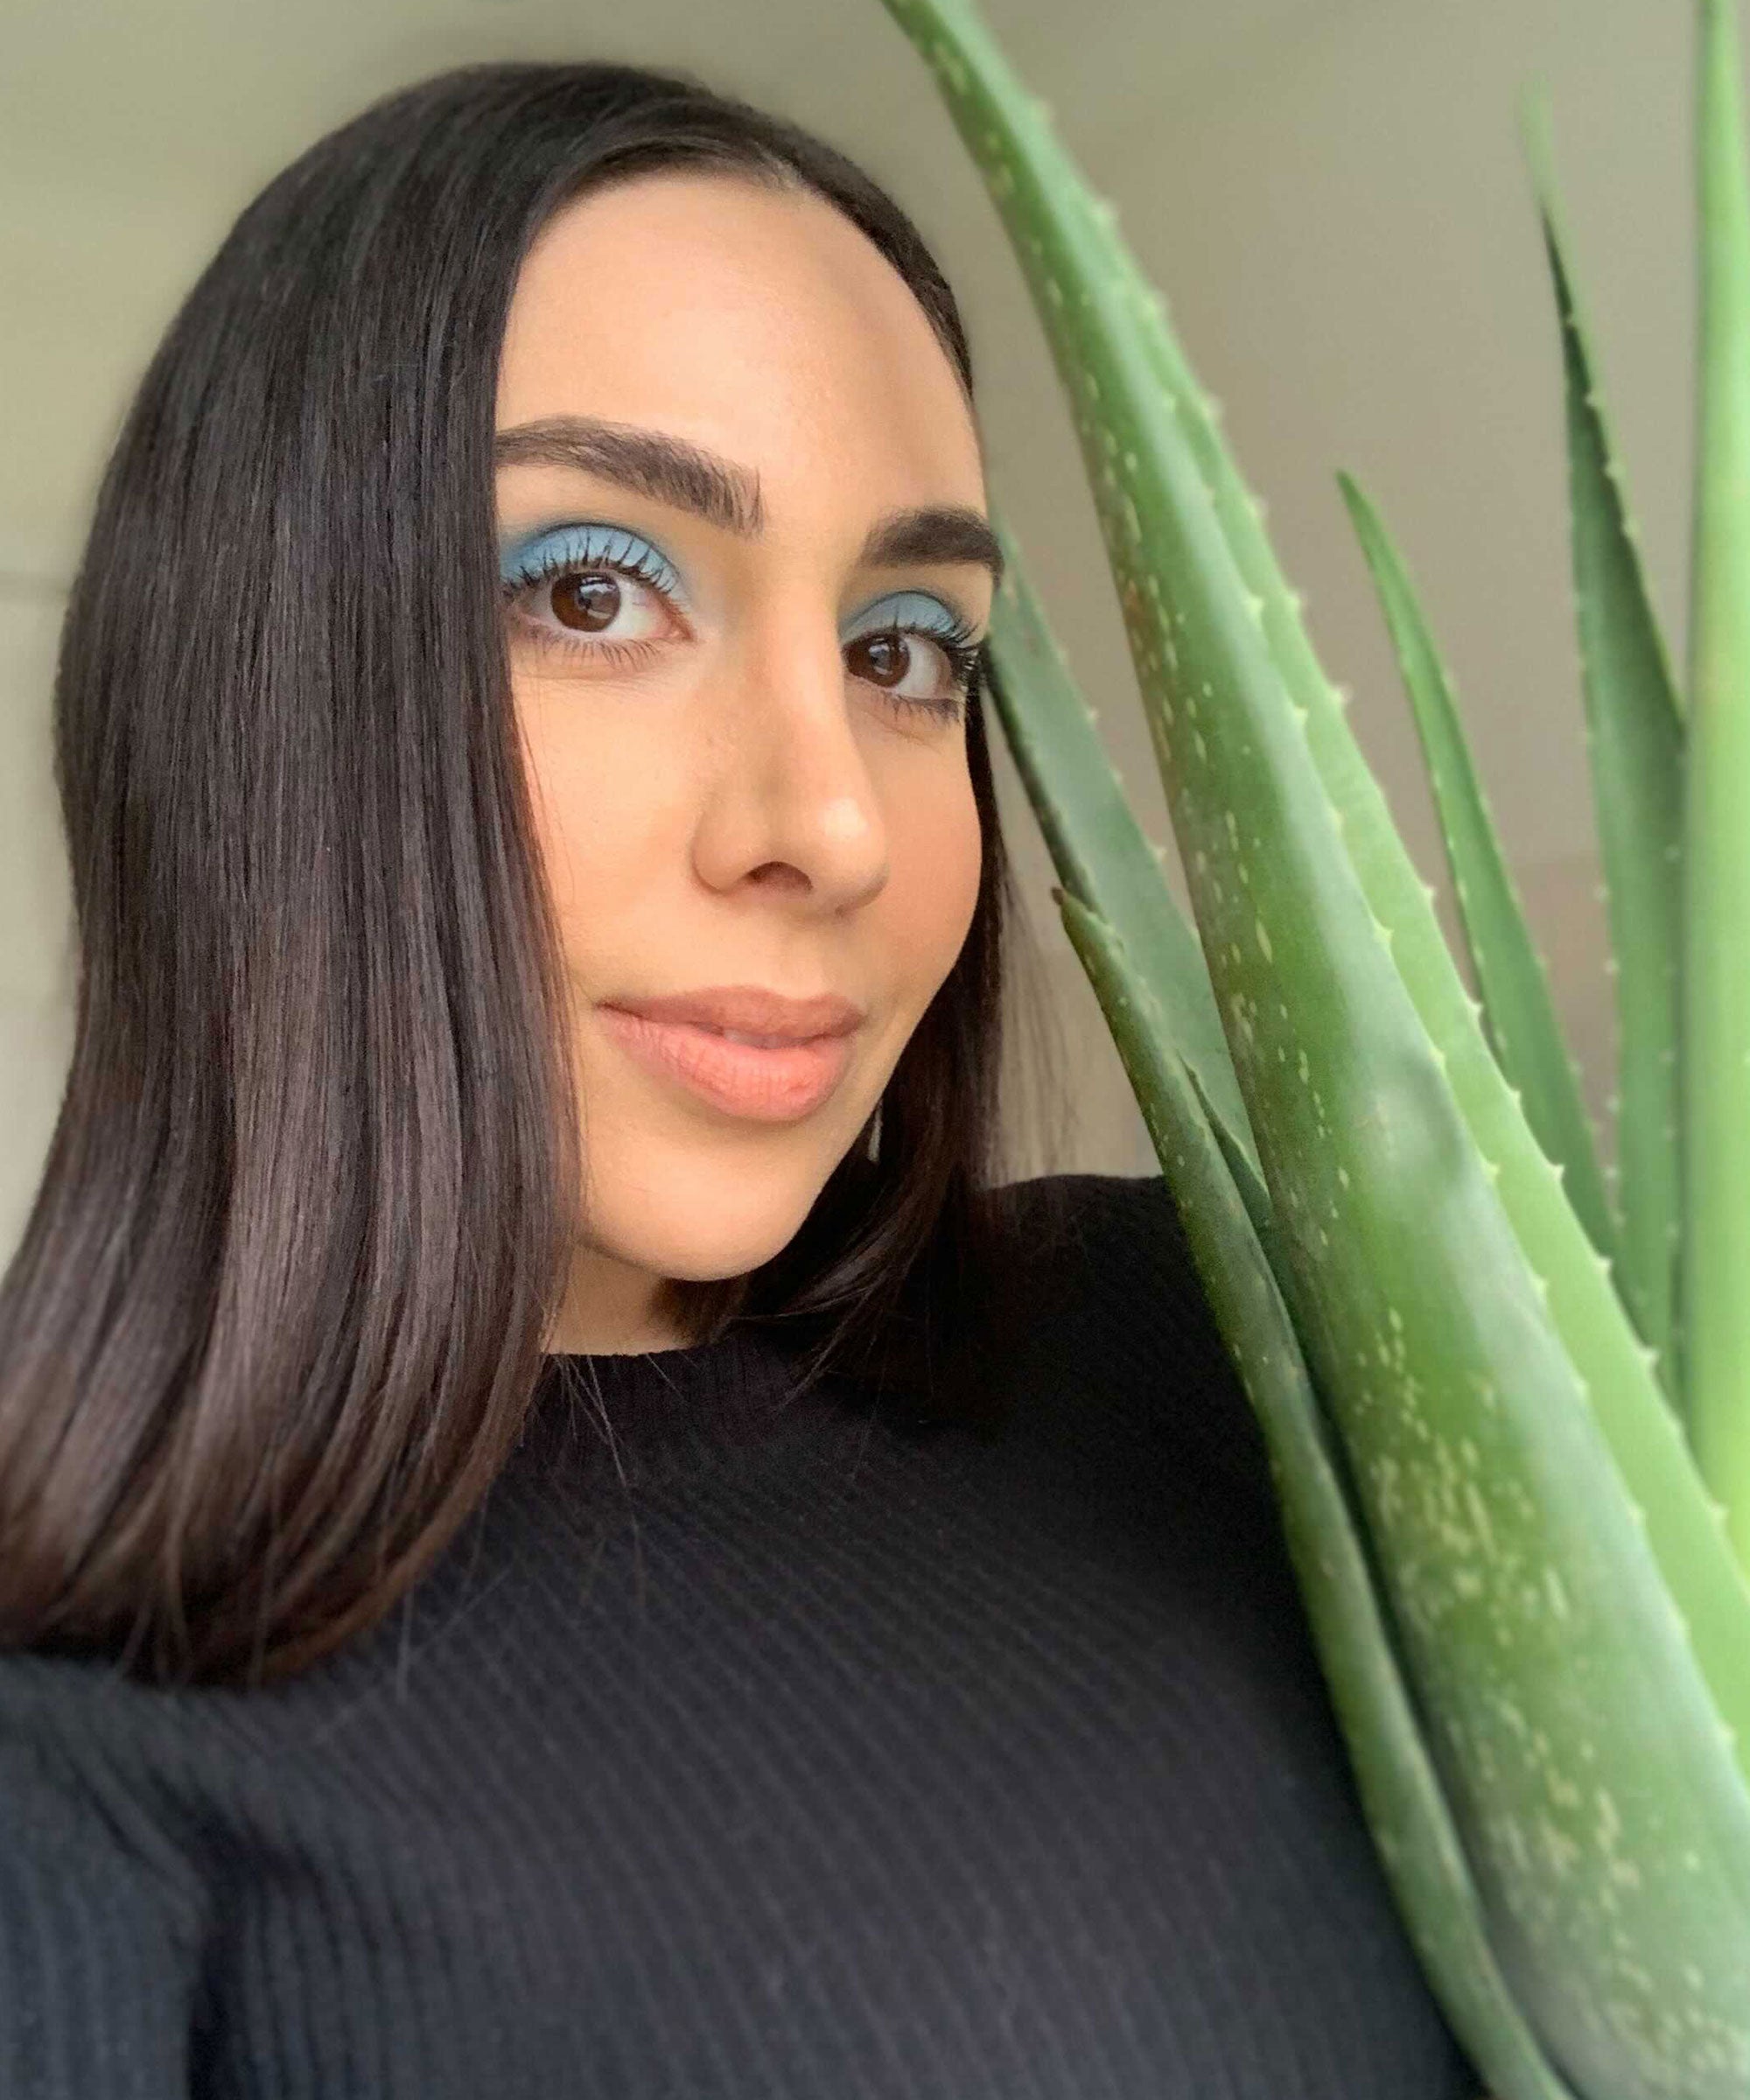 LITTLE DIY on Instagram Aloe Vera castor oil hair mask  For hair growth  use aloe vera and castor oil which is excellent for boosting hair growth  and adding